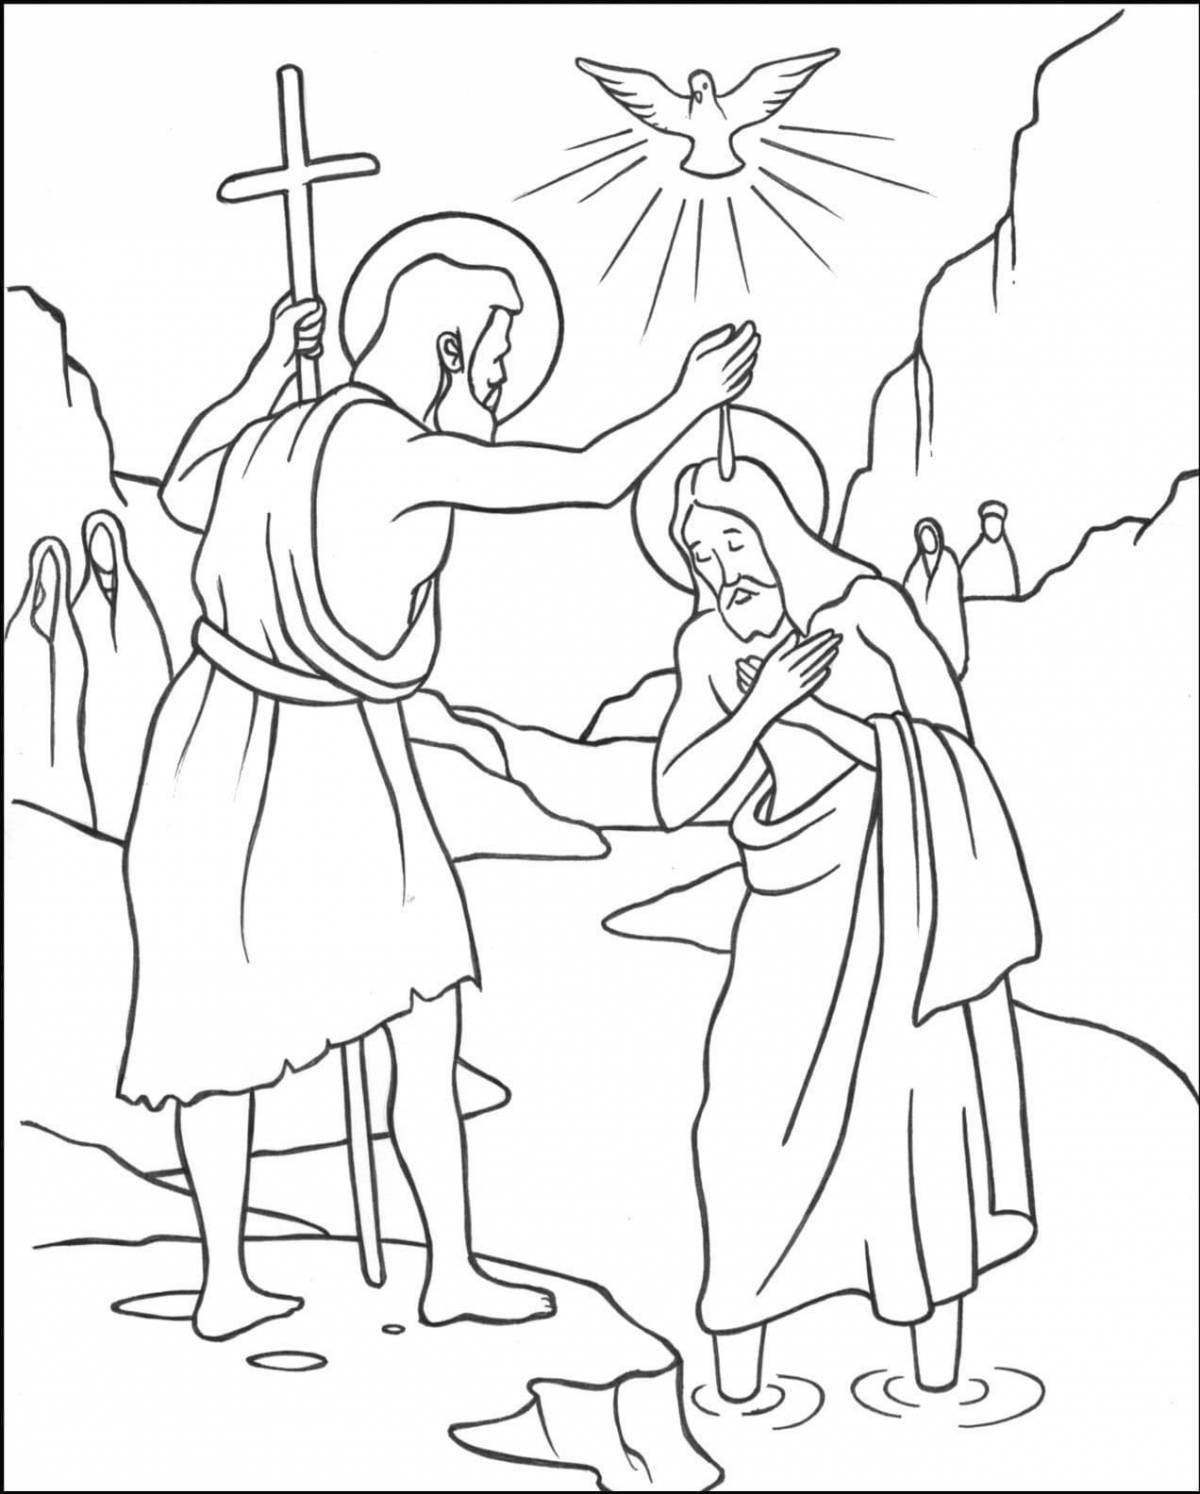 Delightful epiphany coloring book